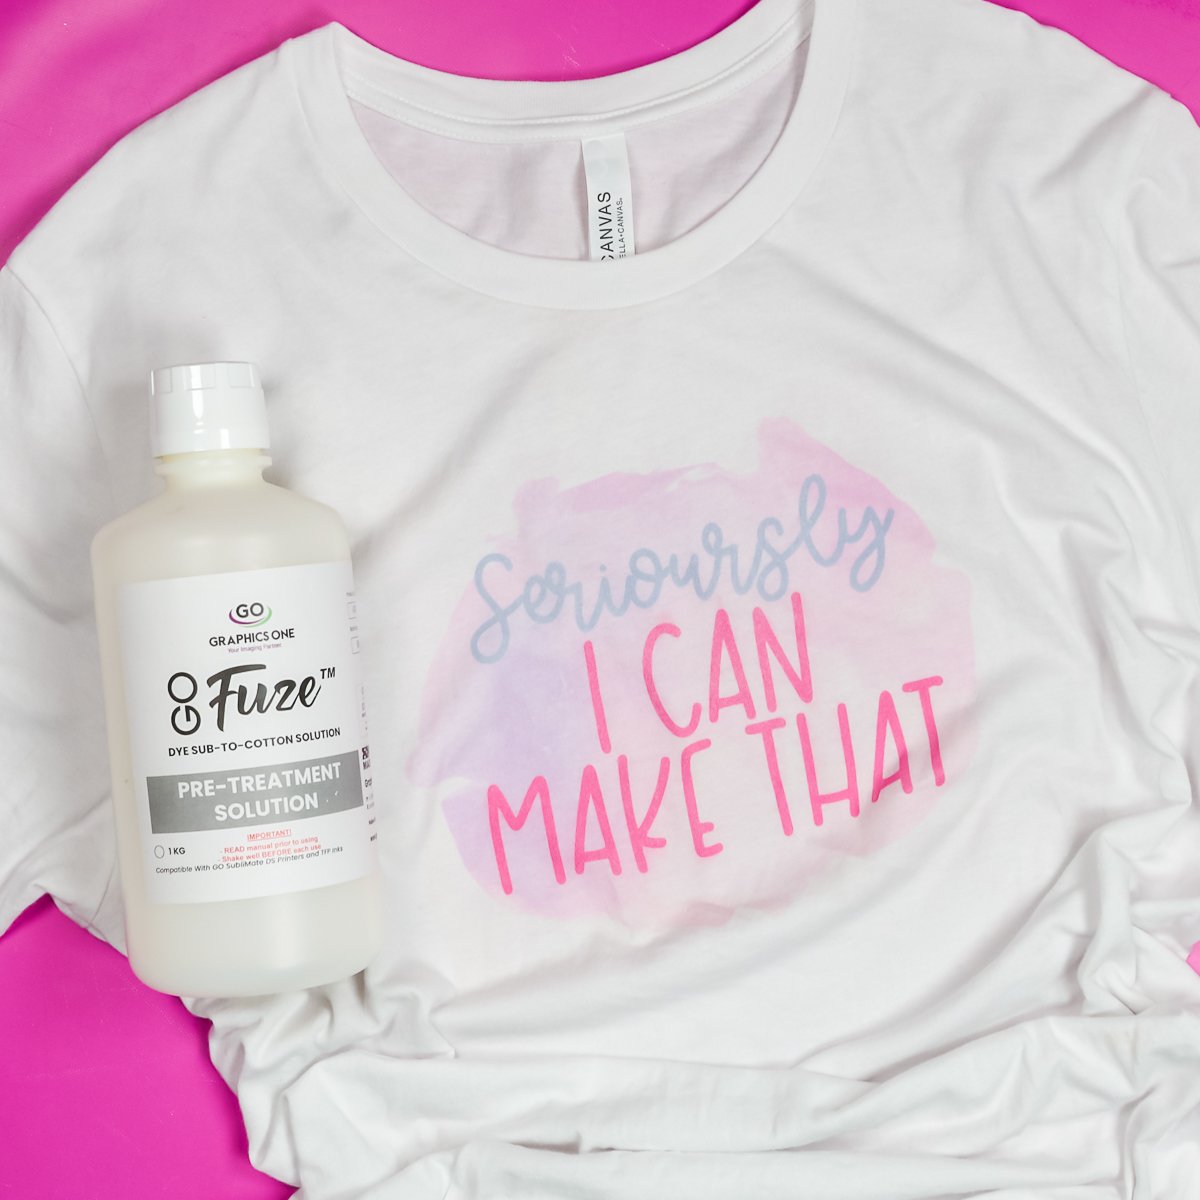 How to Use Sublimation Cotton Spray the Right Way - Angie Holden